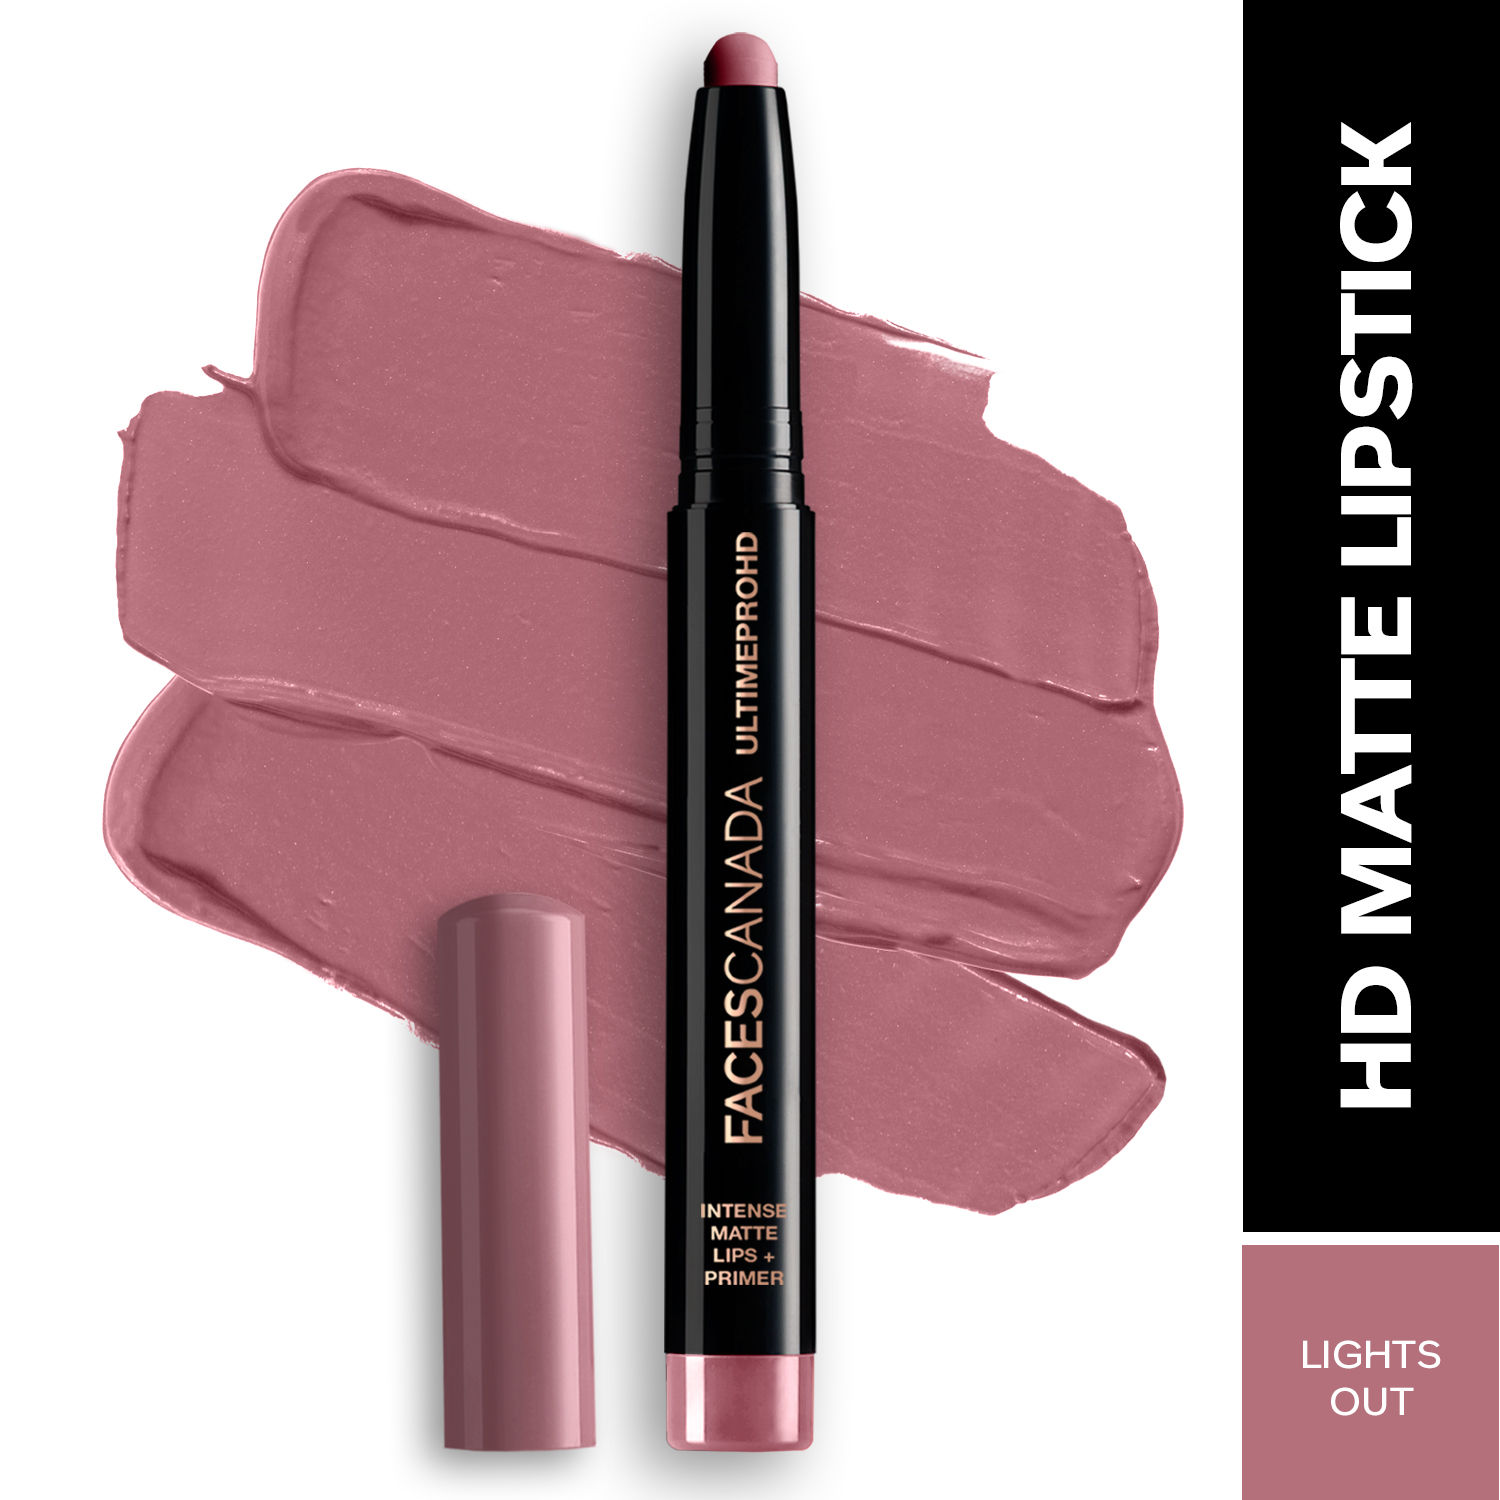 Buy FACES CANADA Ultime Pro HD Intense Matte Lipstick + Primer - Lights Out, 1.4g | 9HR Long Stay | Feather-Light Comfort | Intense Color | Smooth Glide - Purplle